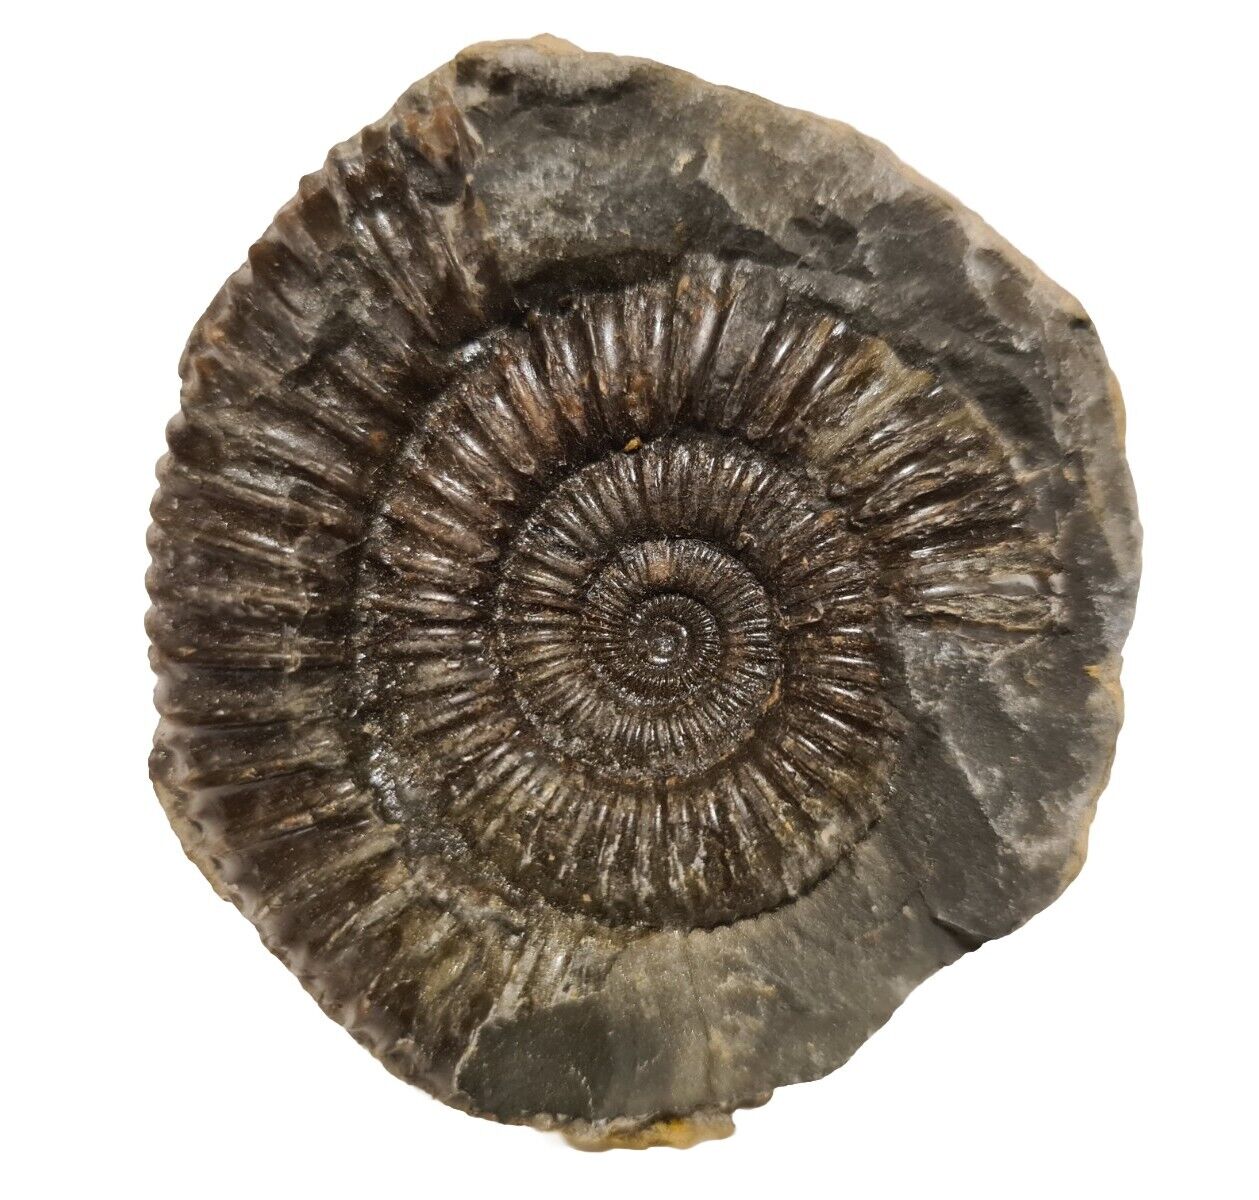 Ammonite Fossil - Whitby, North Yorkshire, UK. 